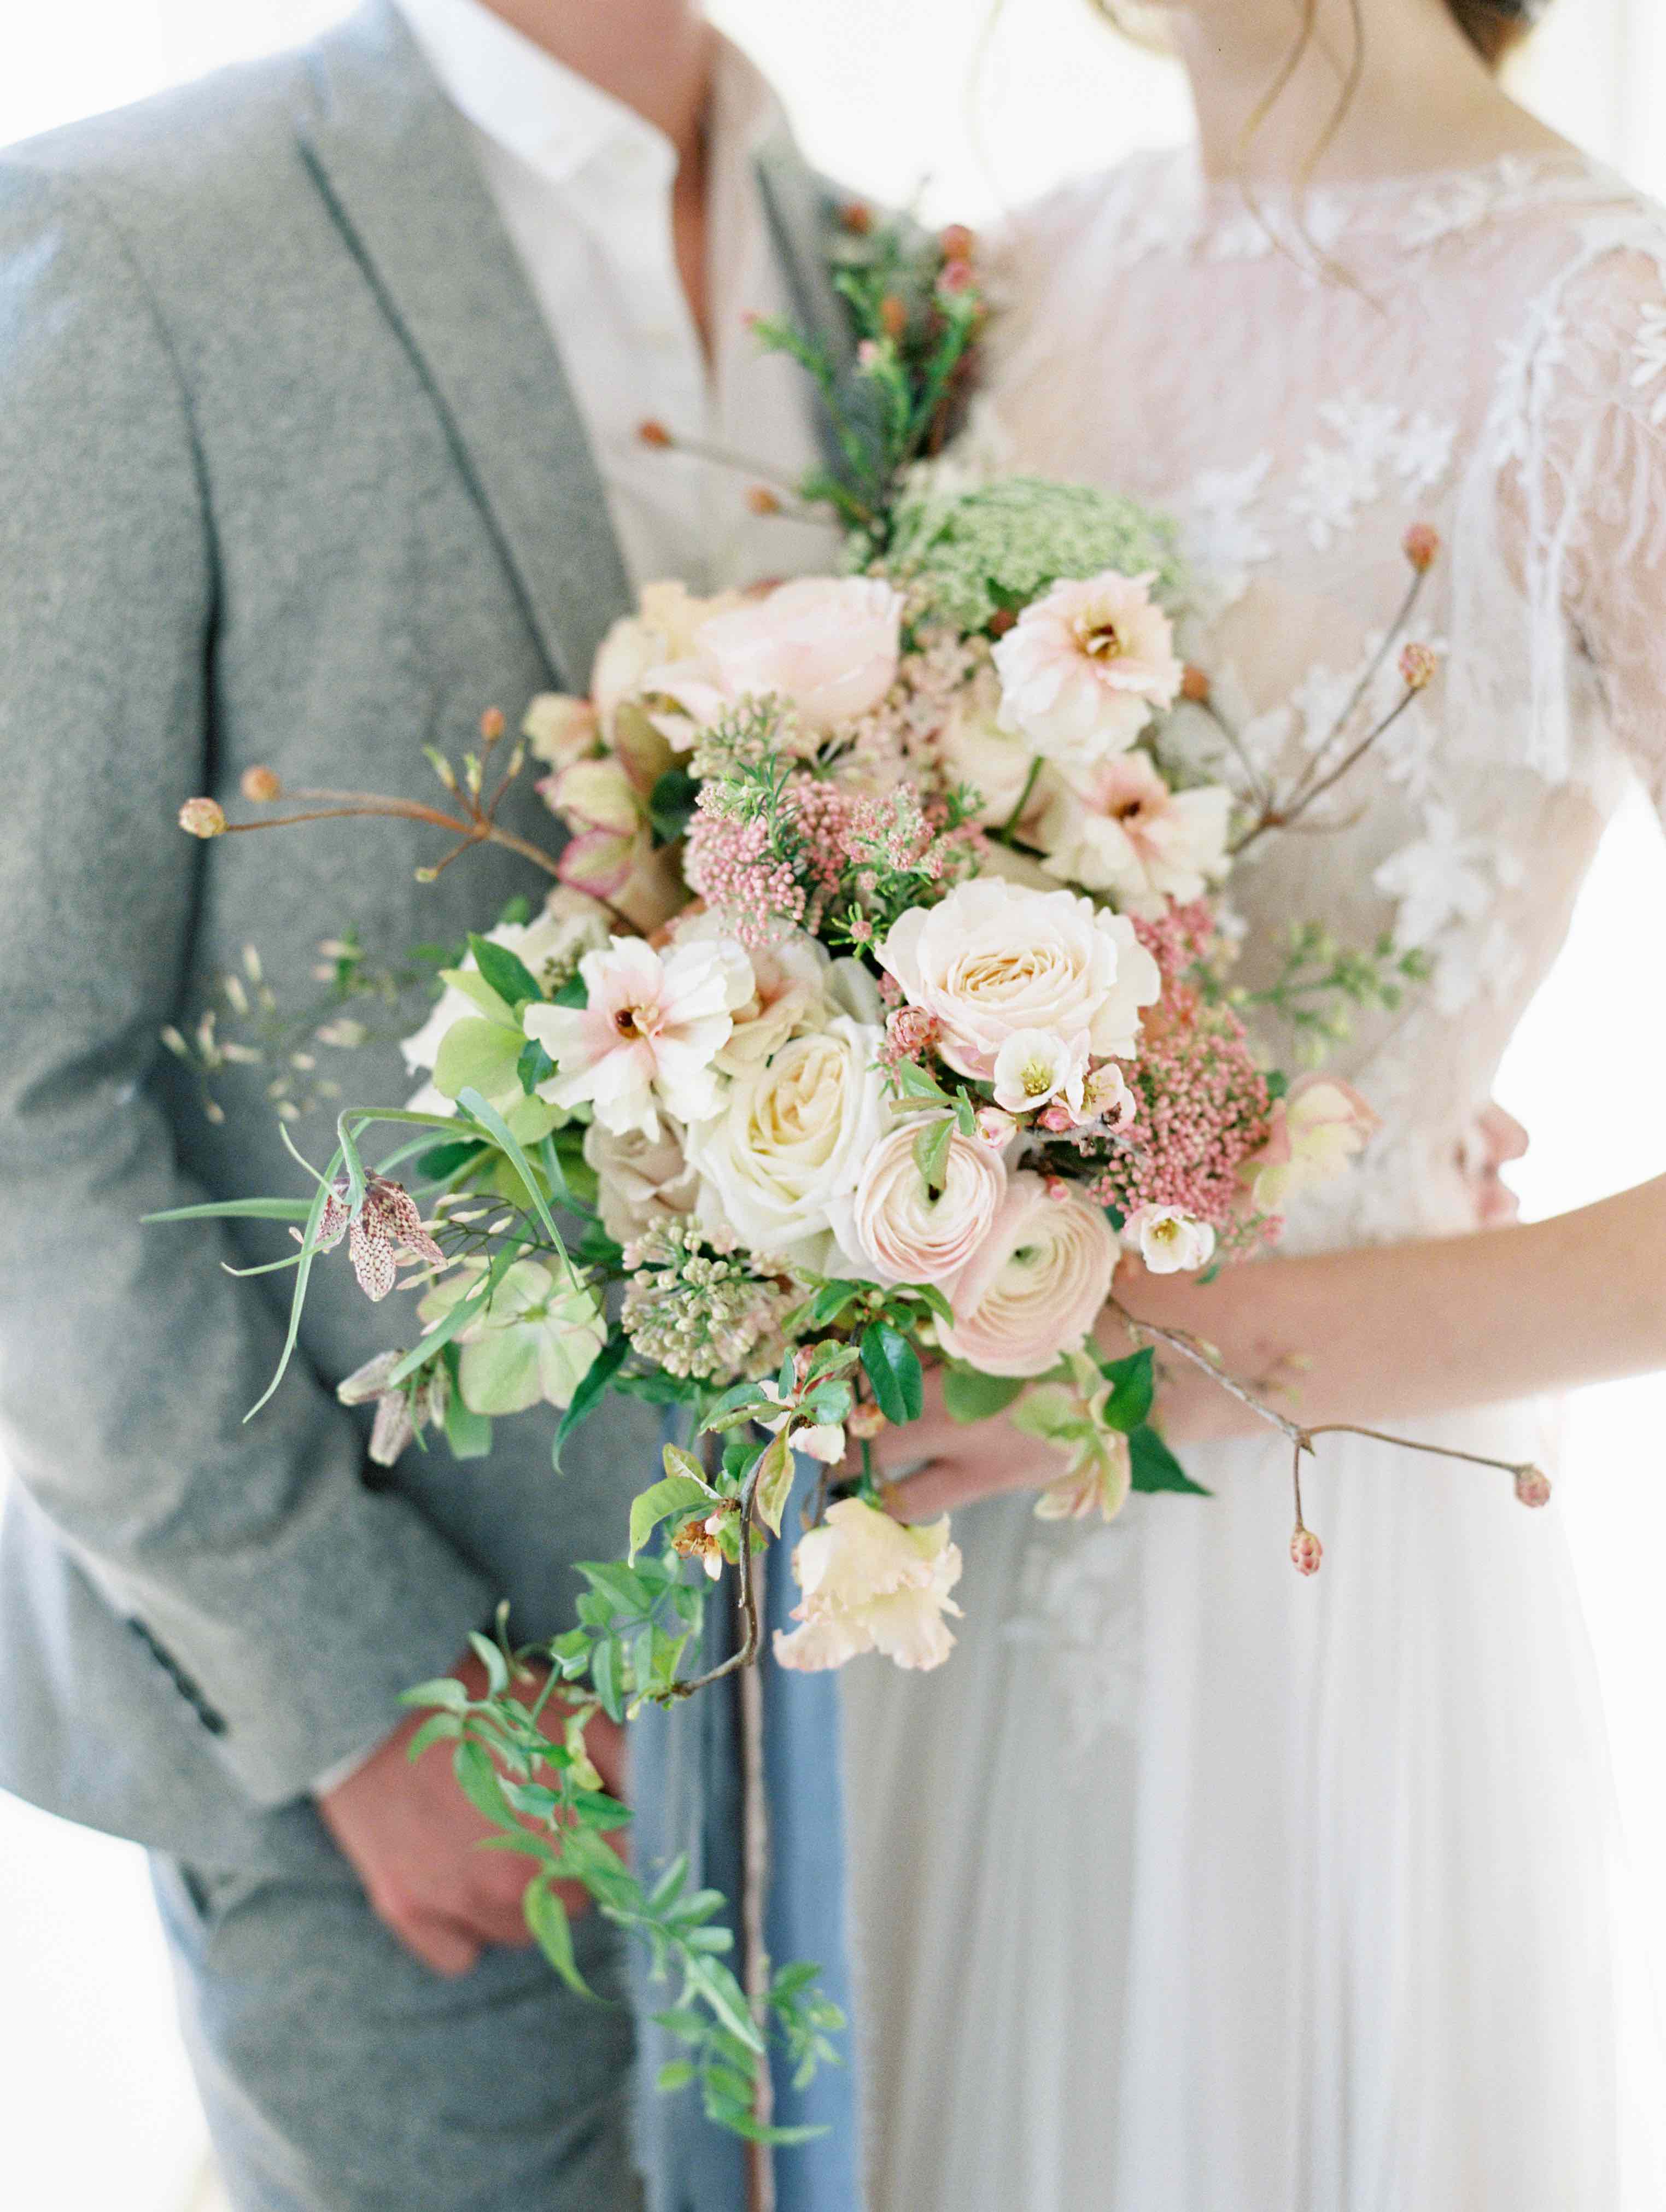 Bridal wedding bouquet in delicate blush pink Spring flowers